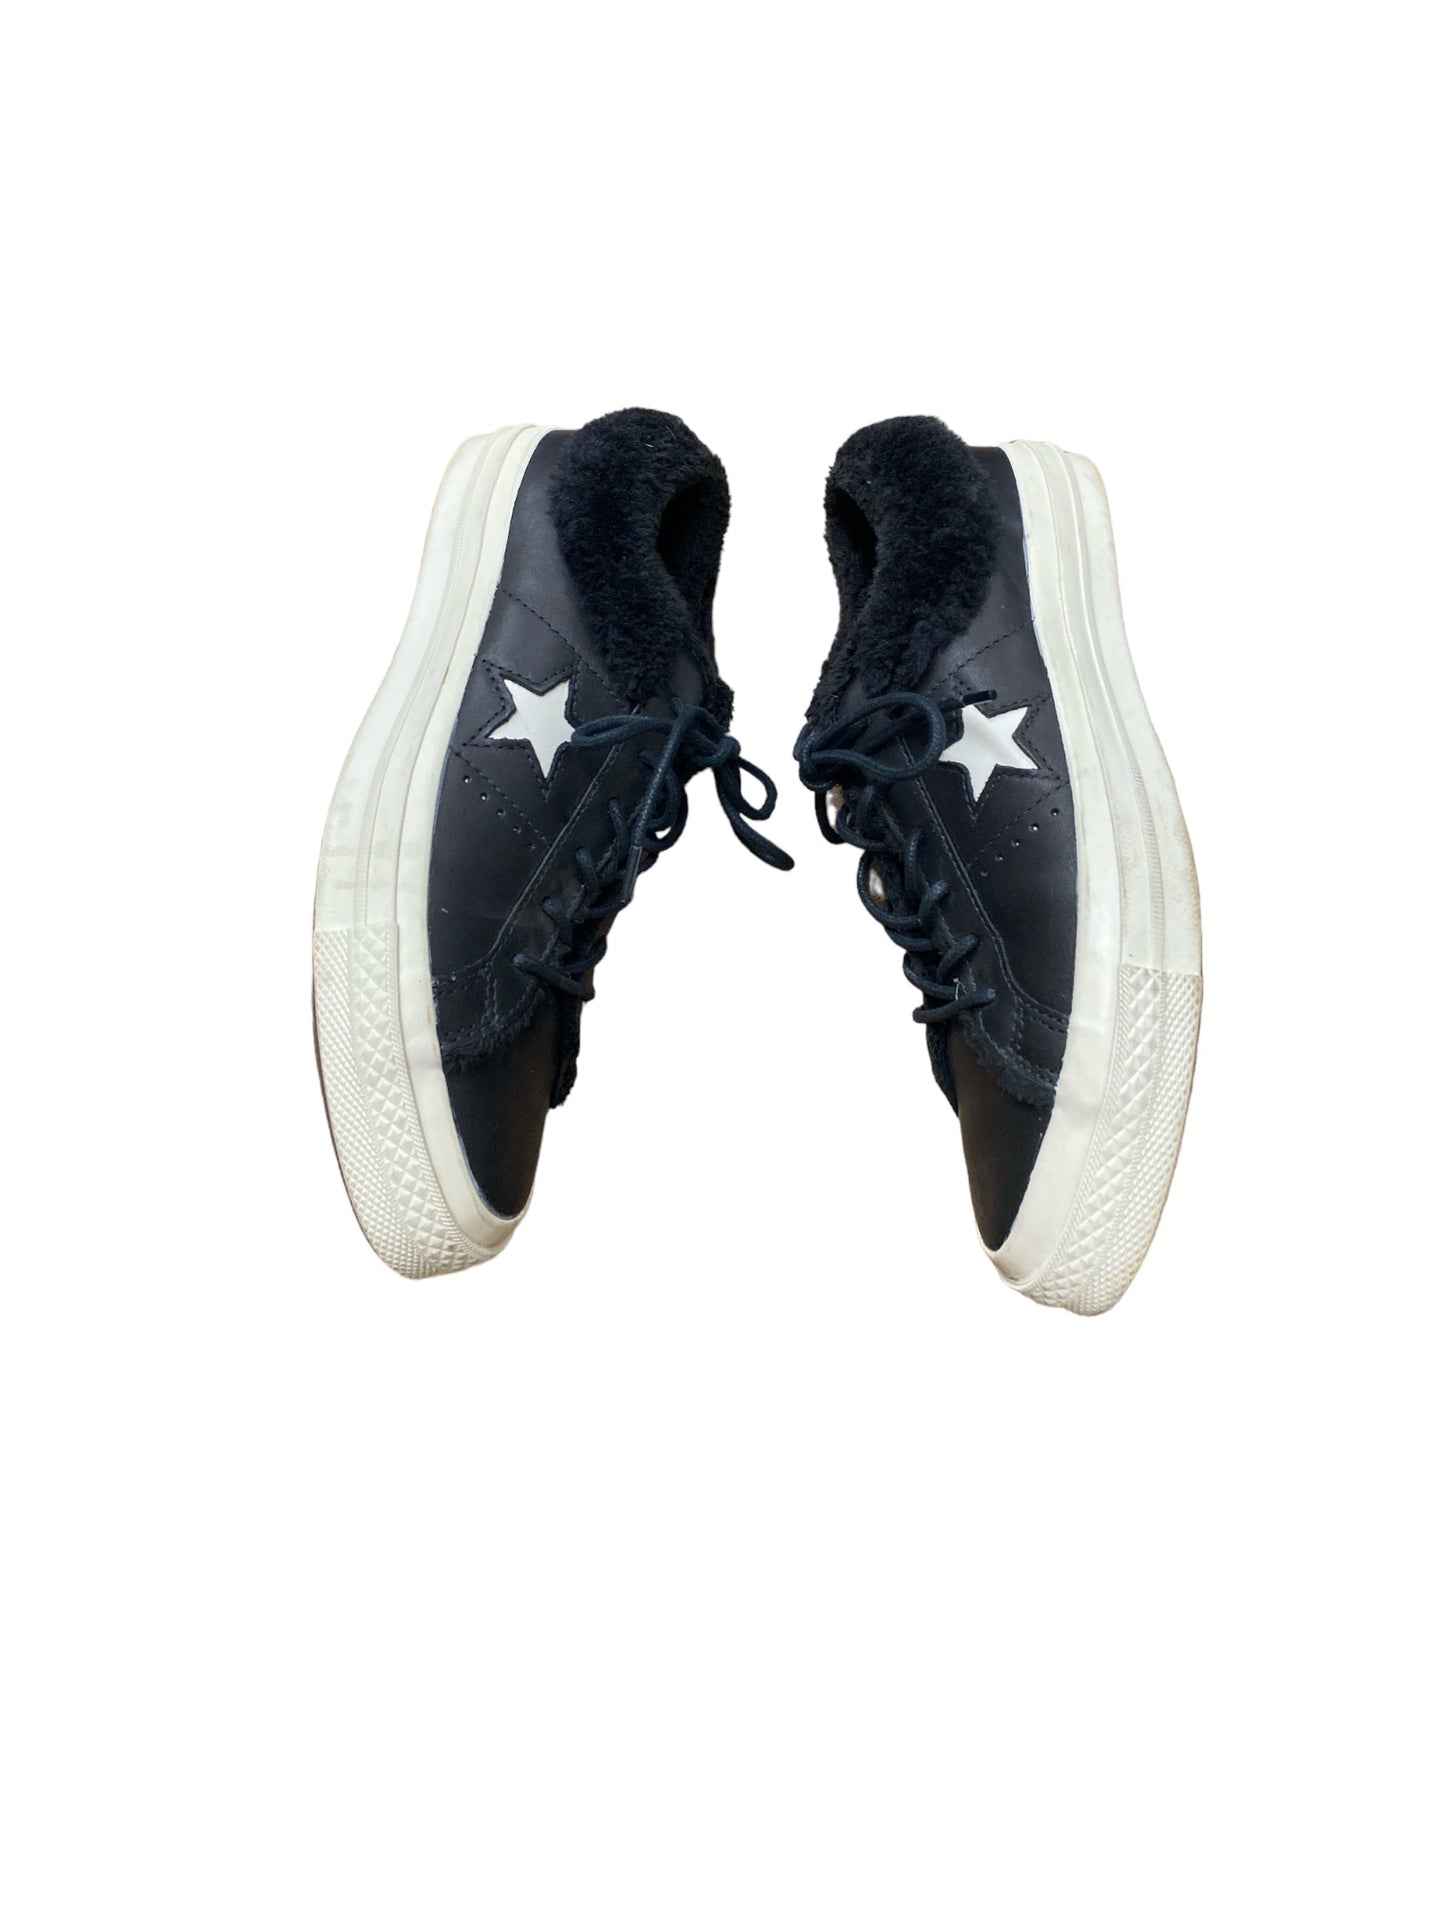 Shoes Sneakers By Converse  Size: 7.5